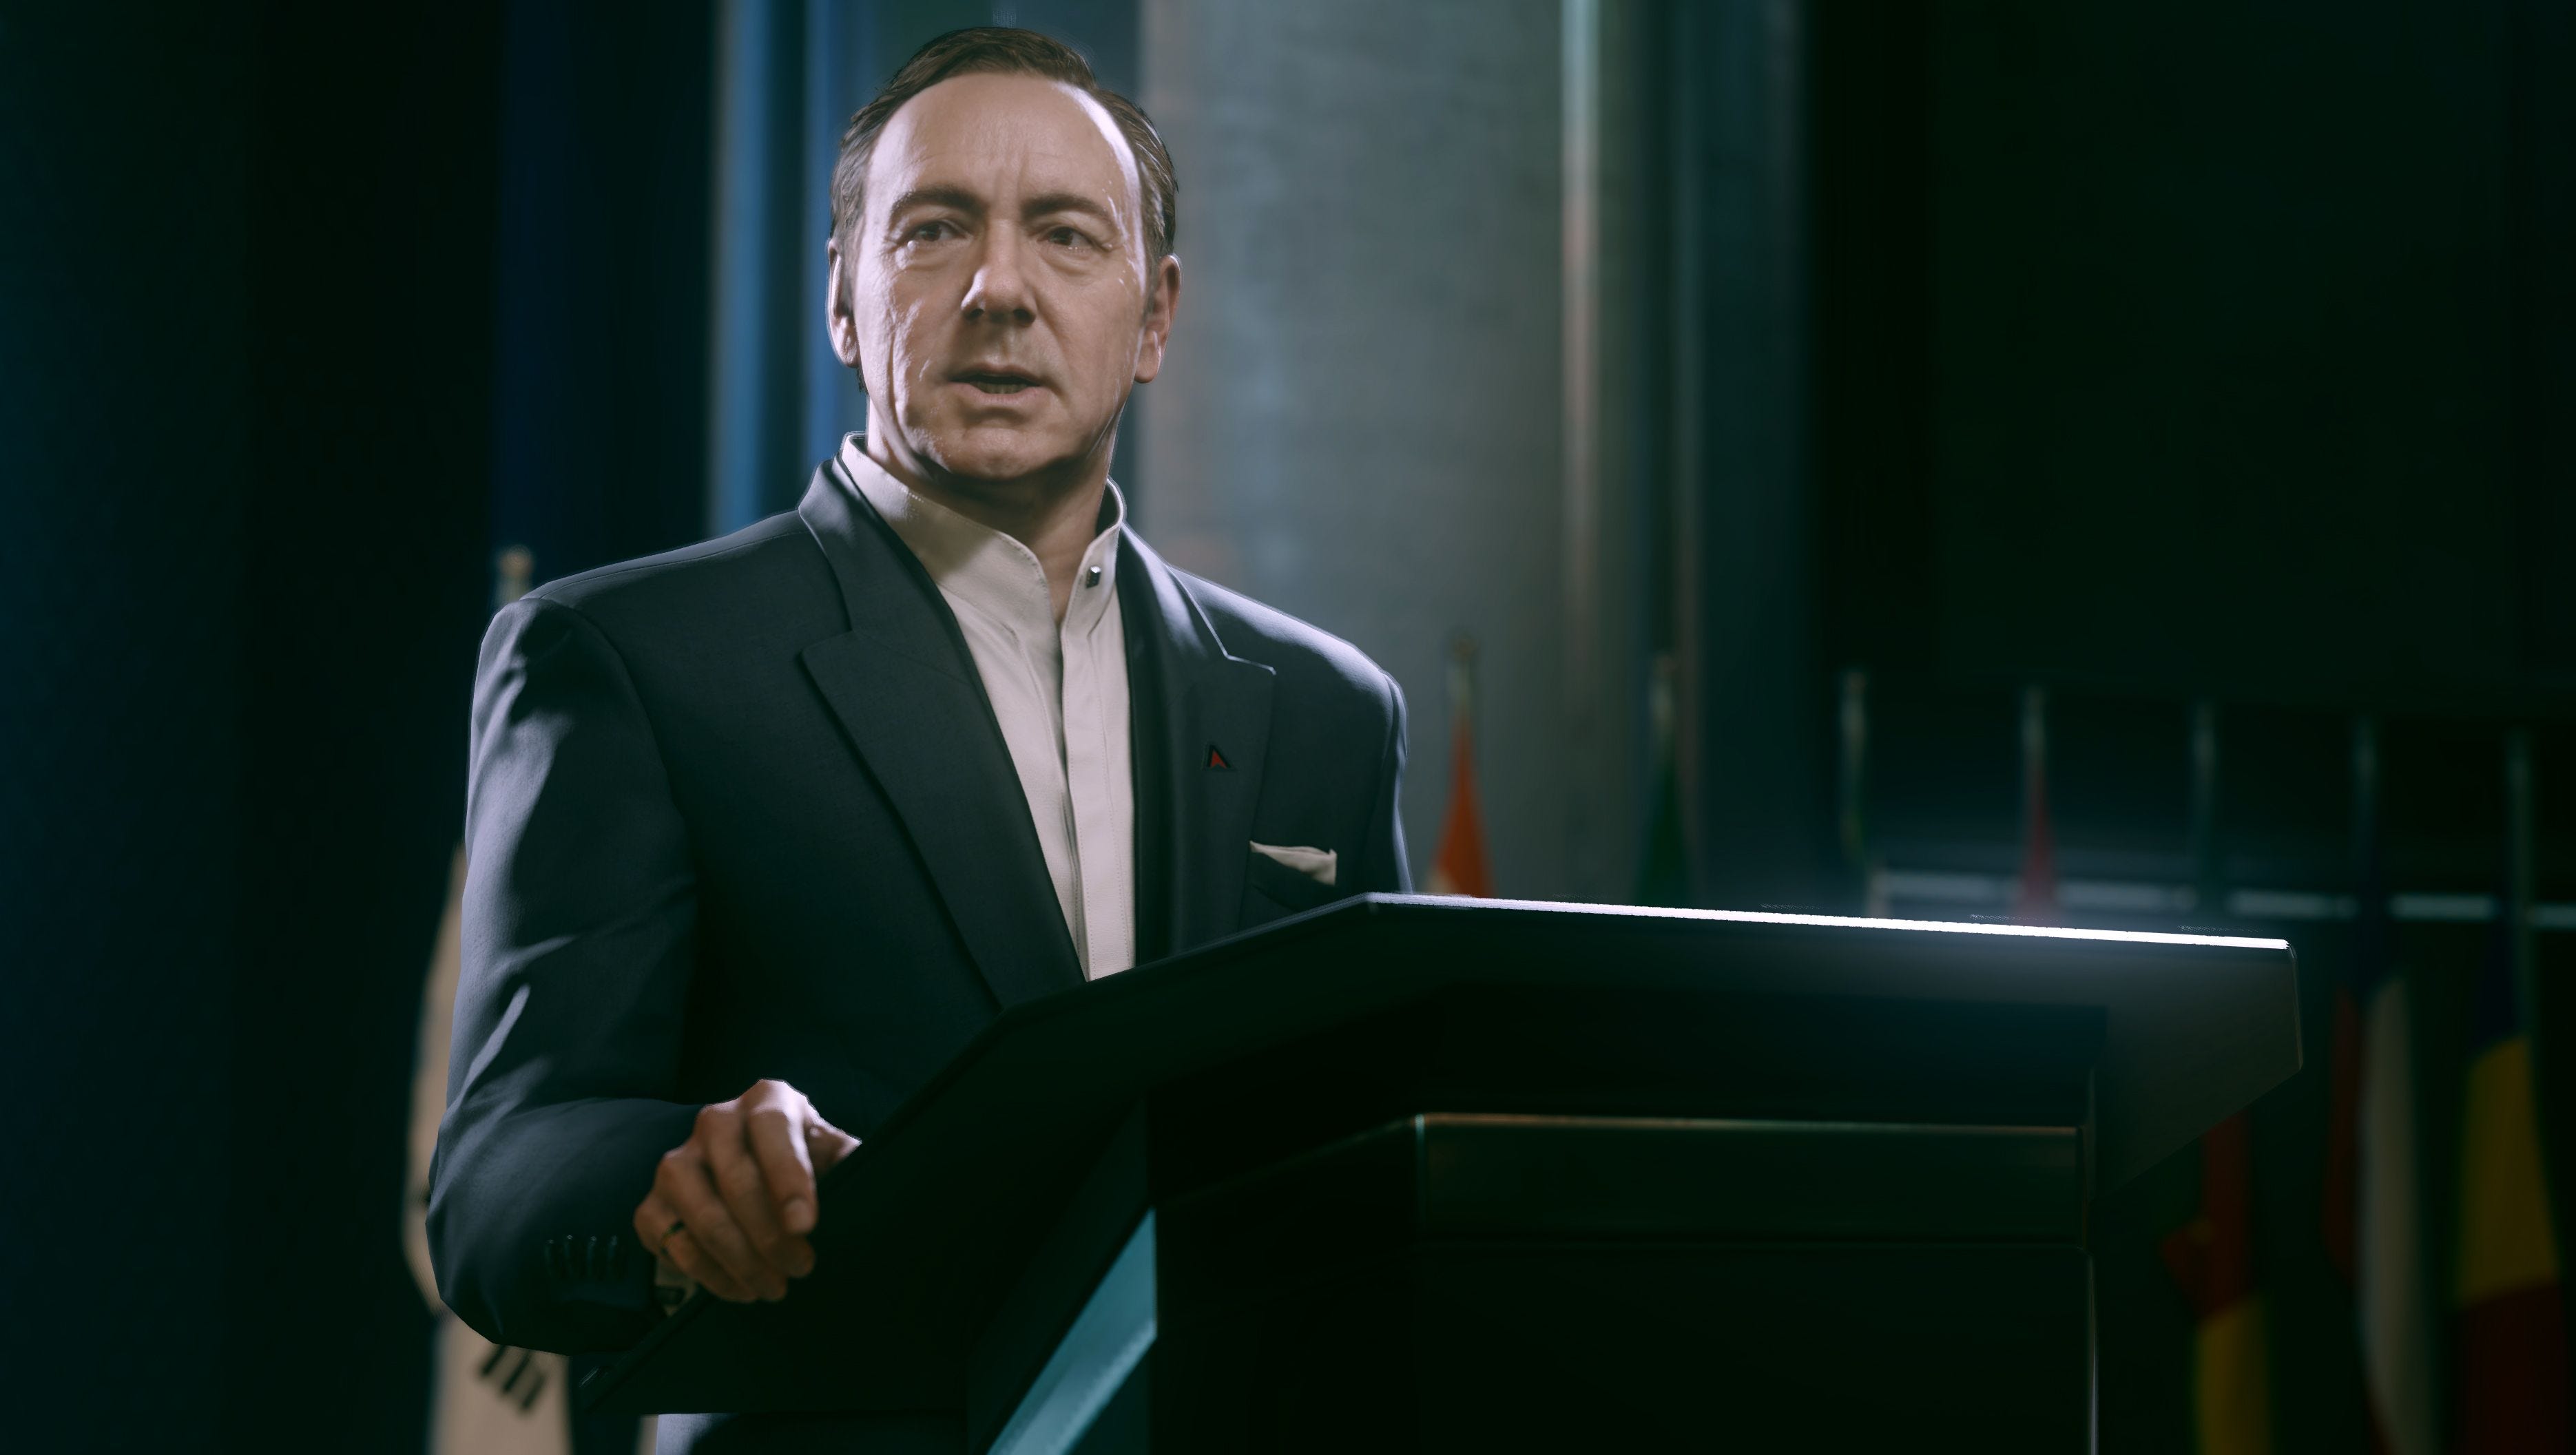 celebrities in video games - kevin spacey video game character